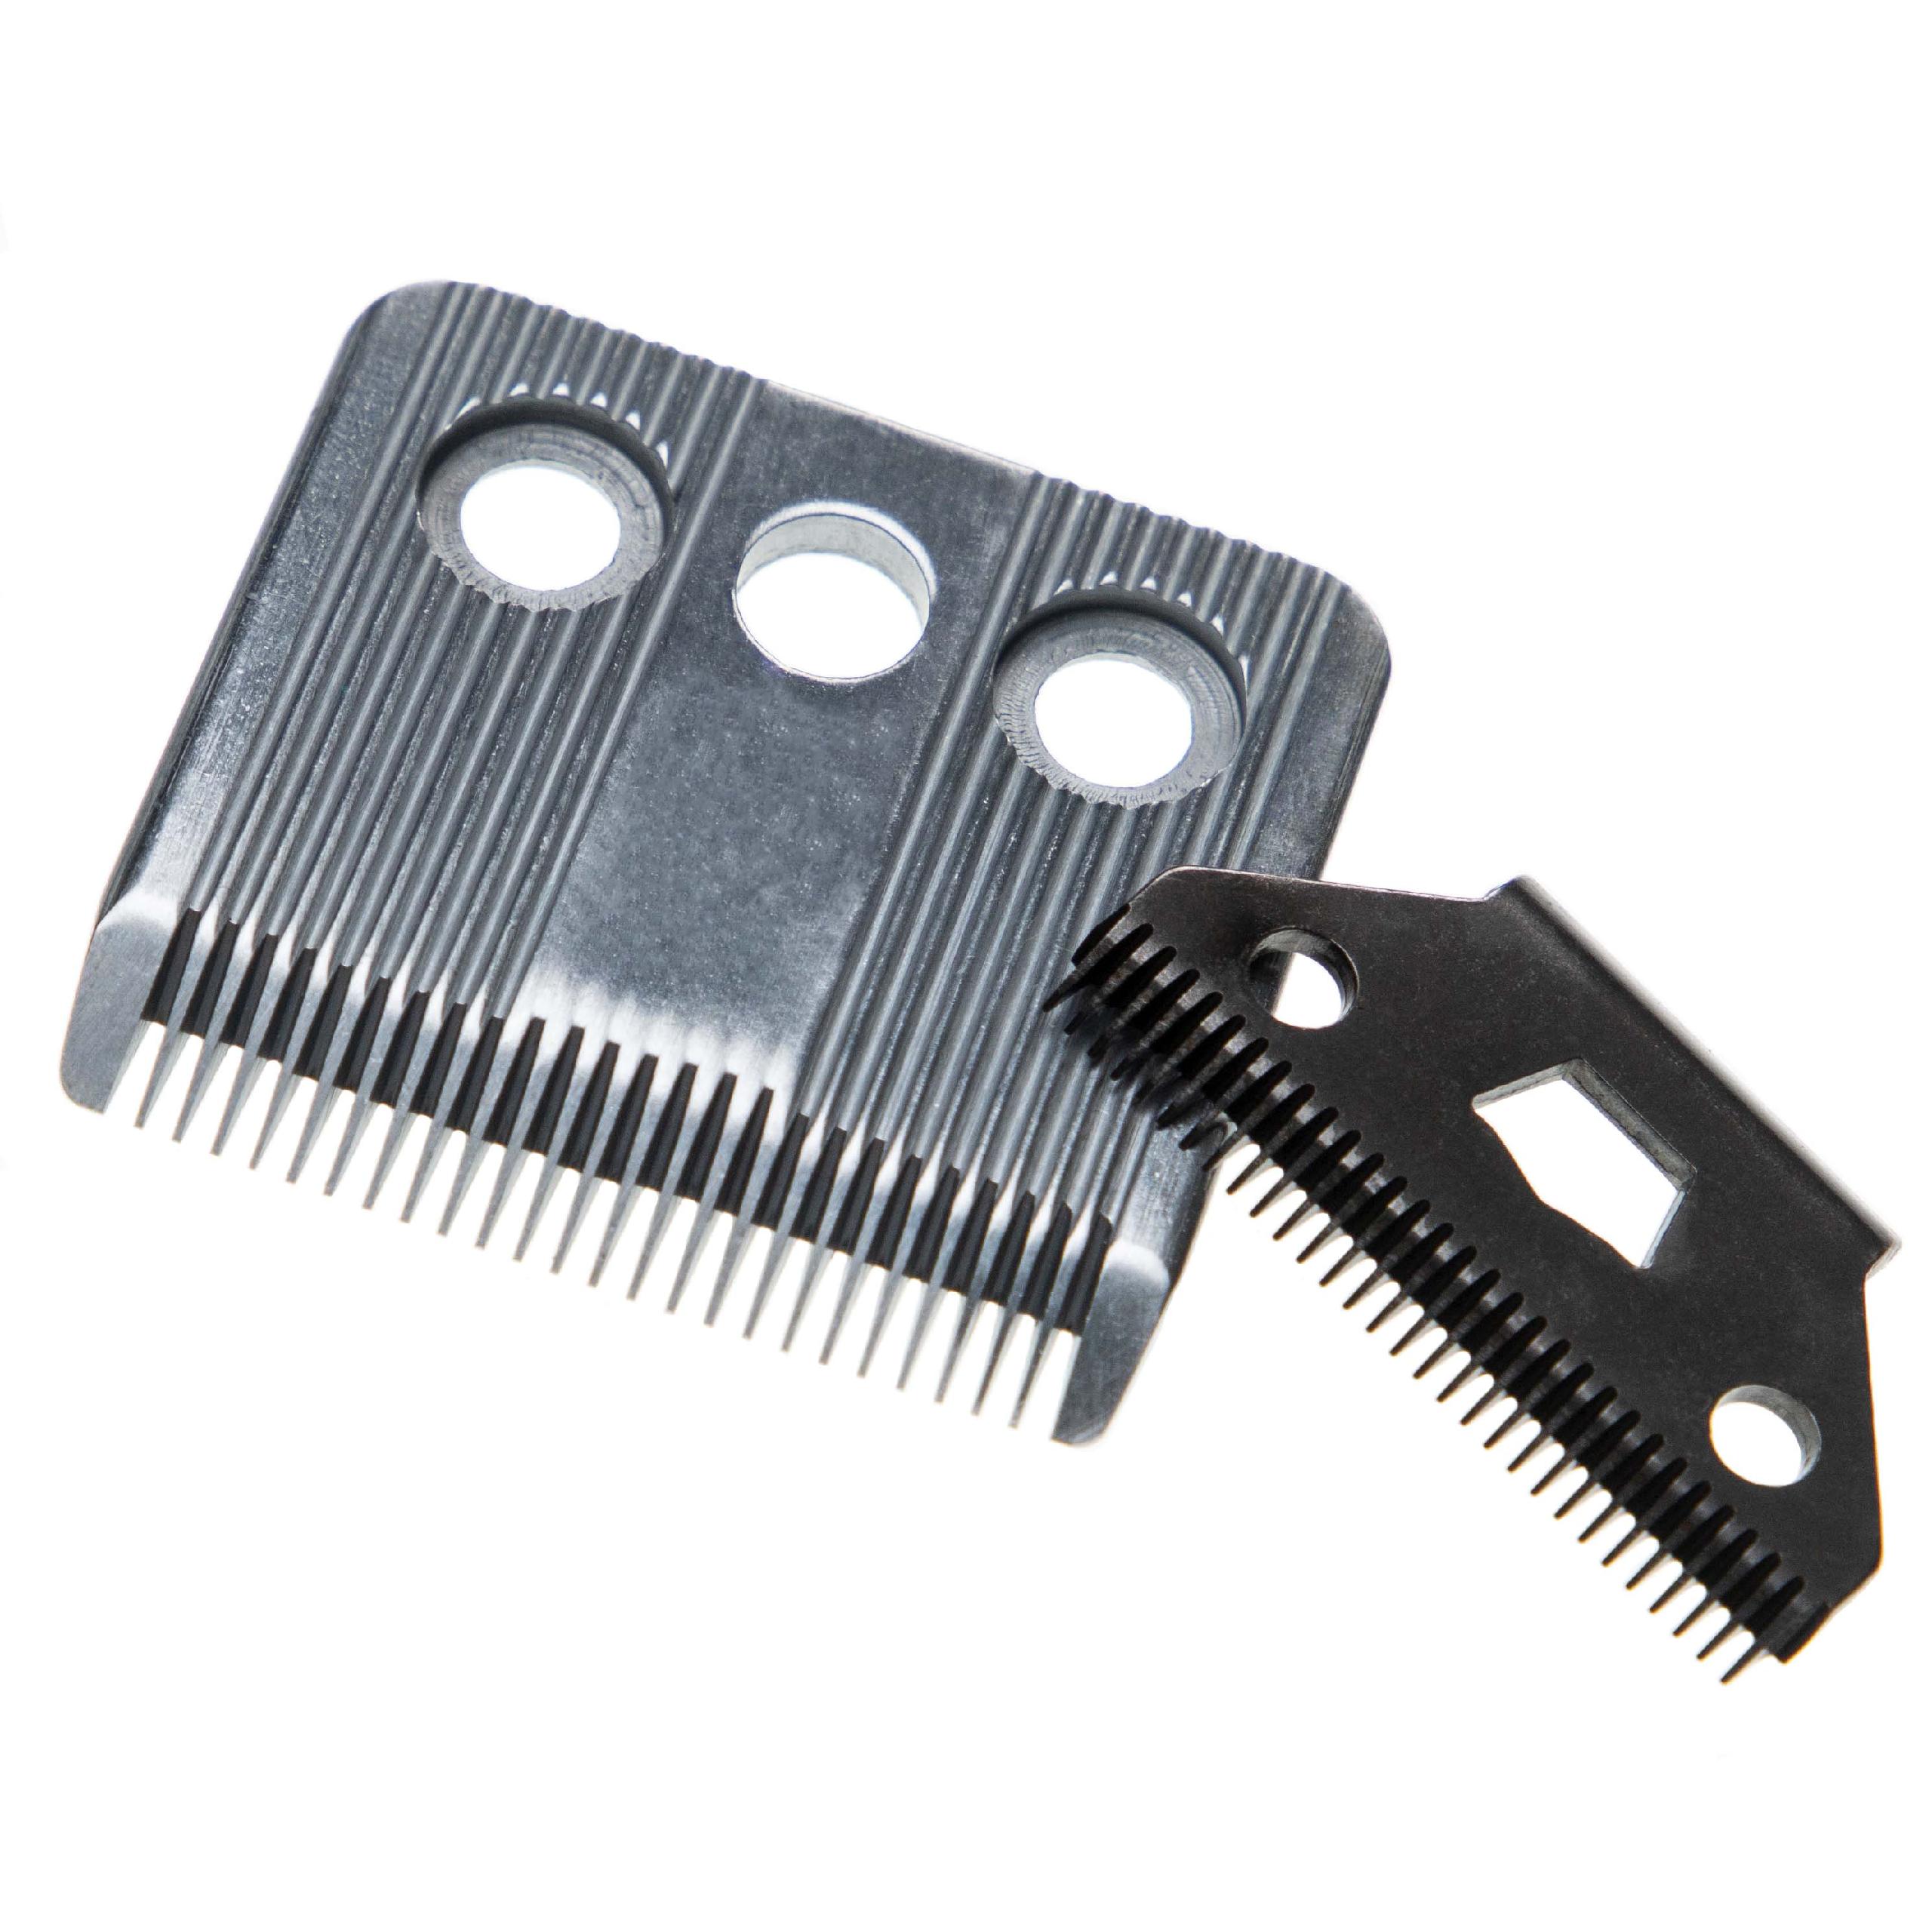 vhbw Cutting Set 2x Blade Replacement for Moser 1401-7600 for Hair Clippers